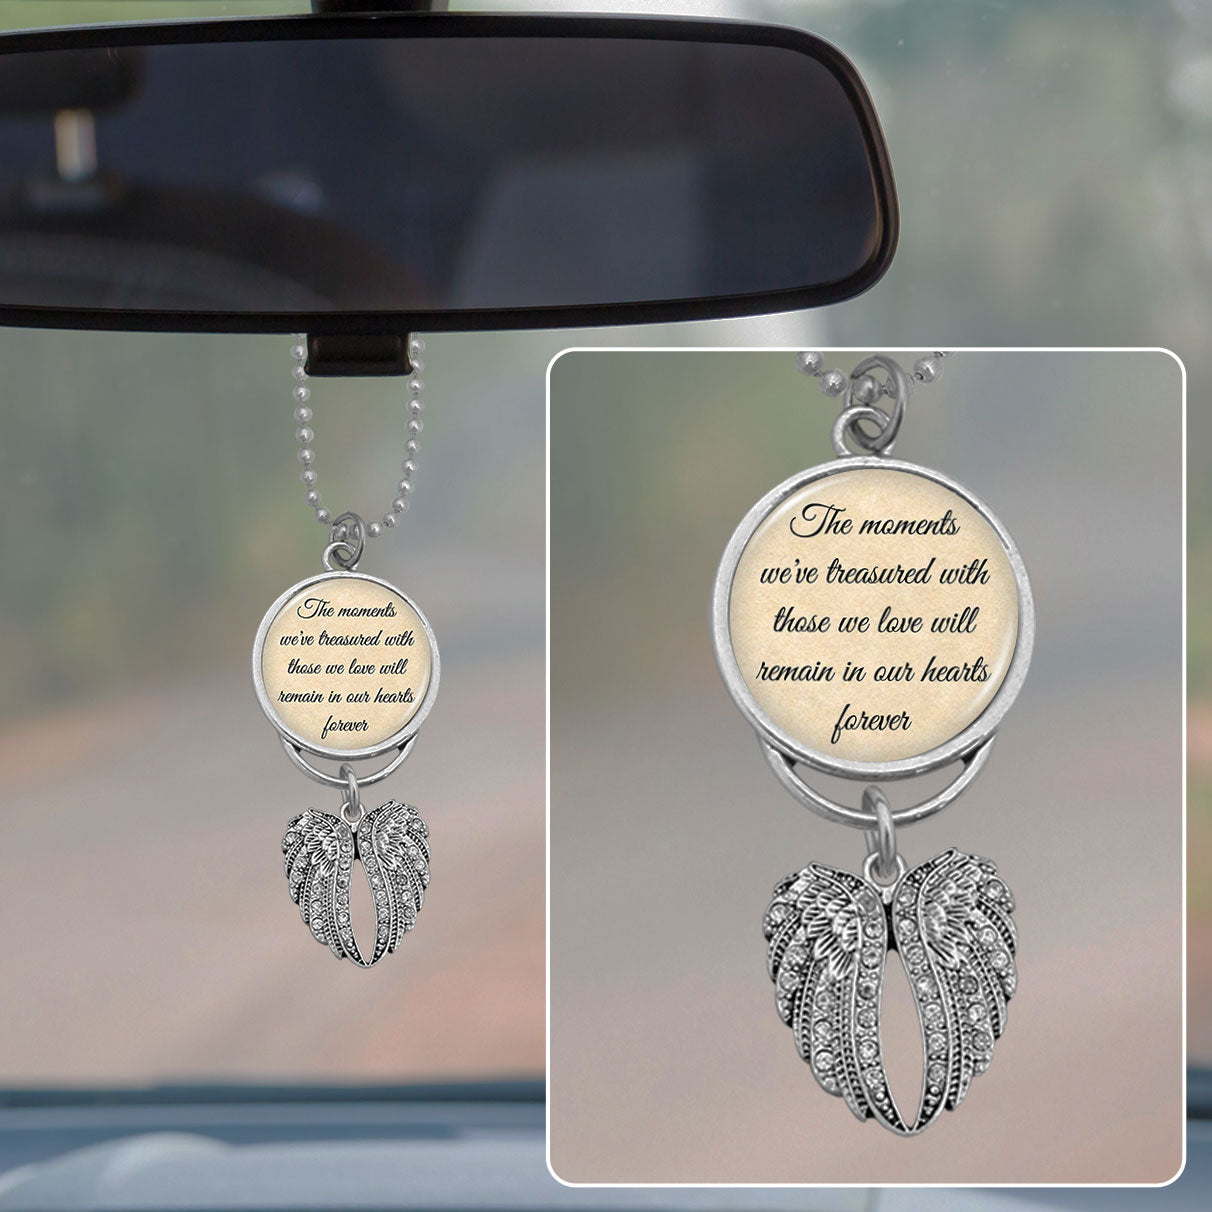 Treasured Moments Rearview Mirror Charm